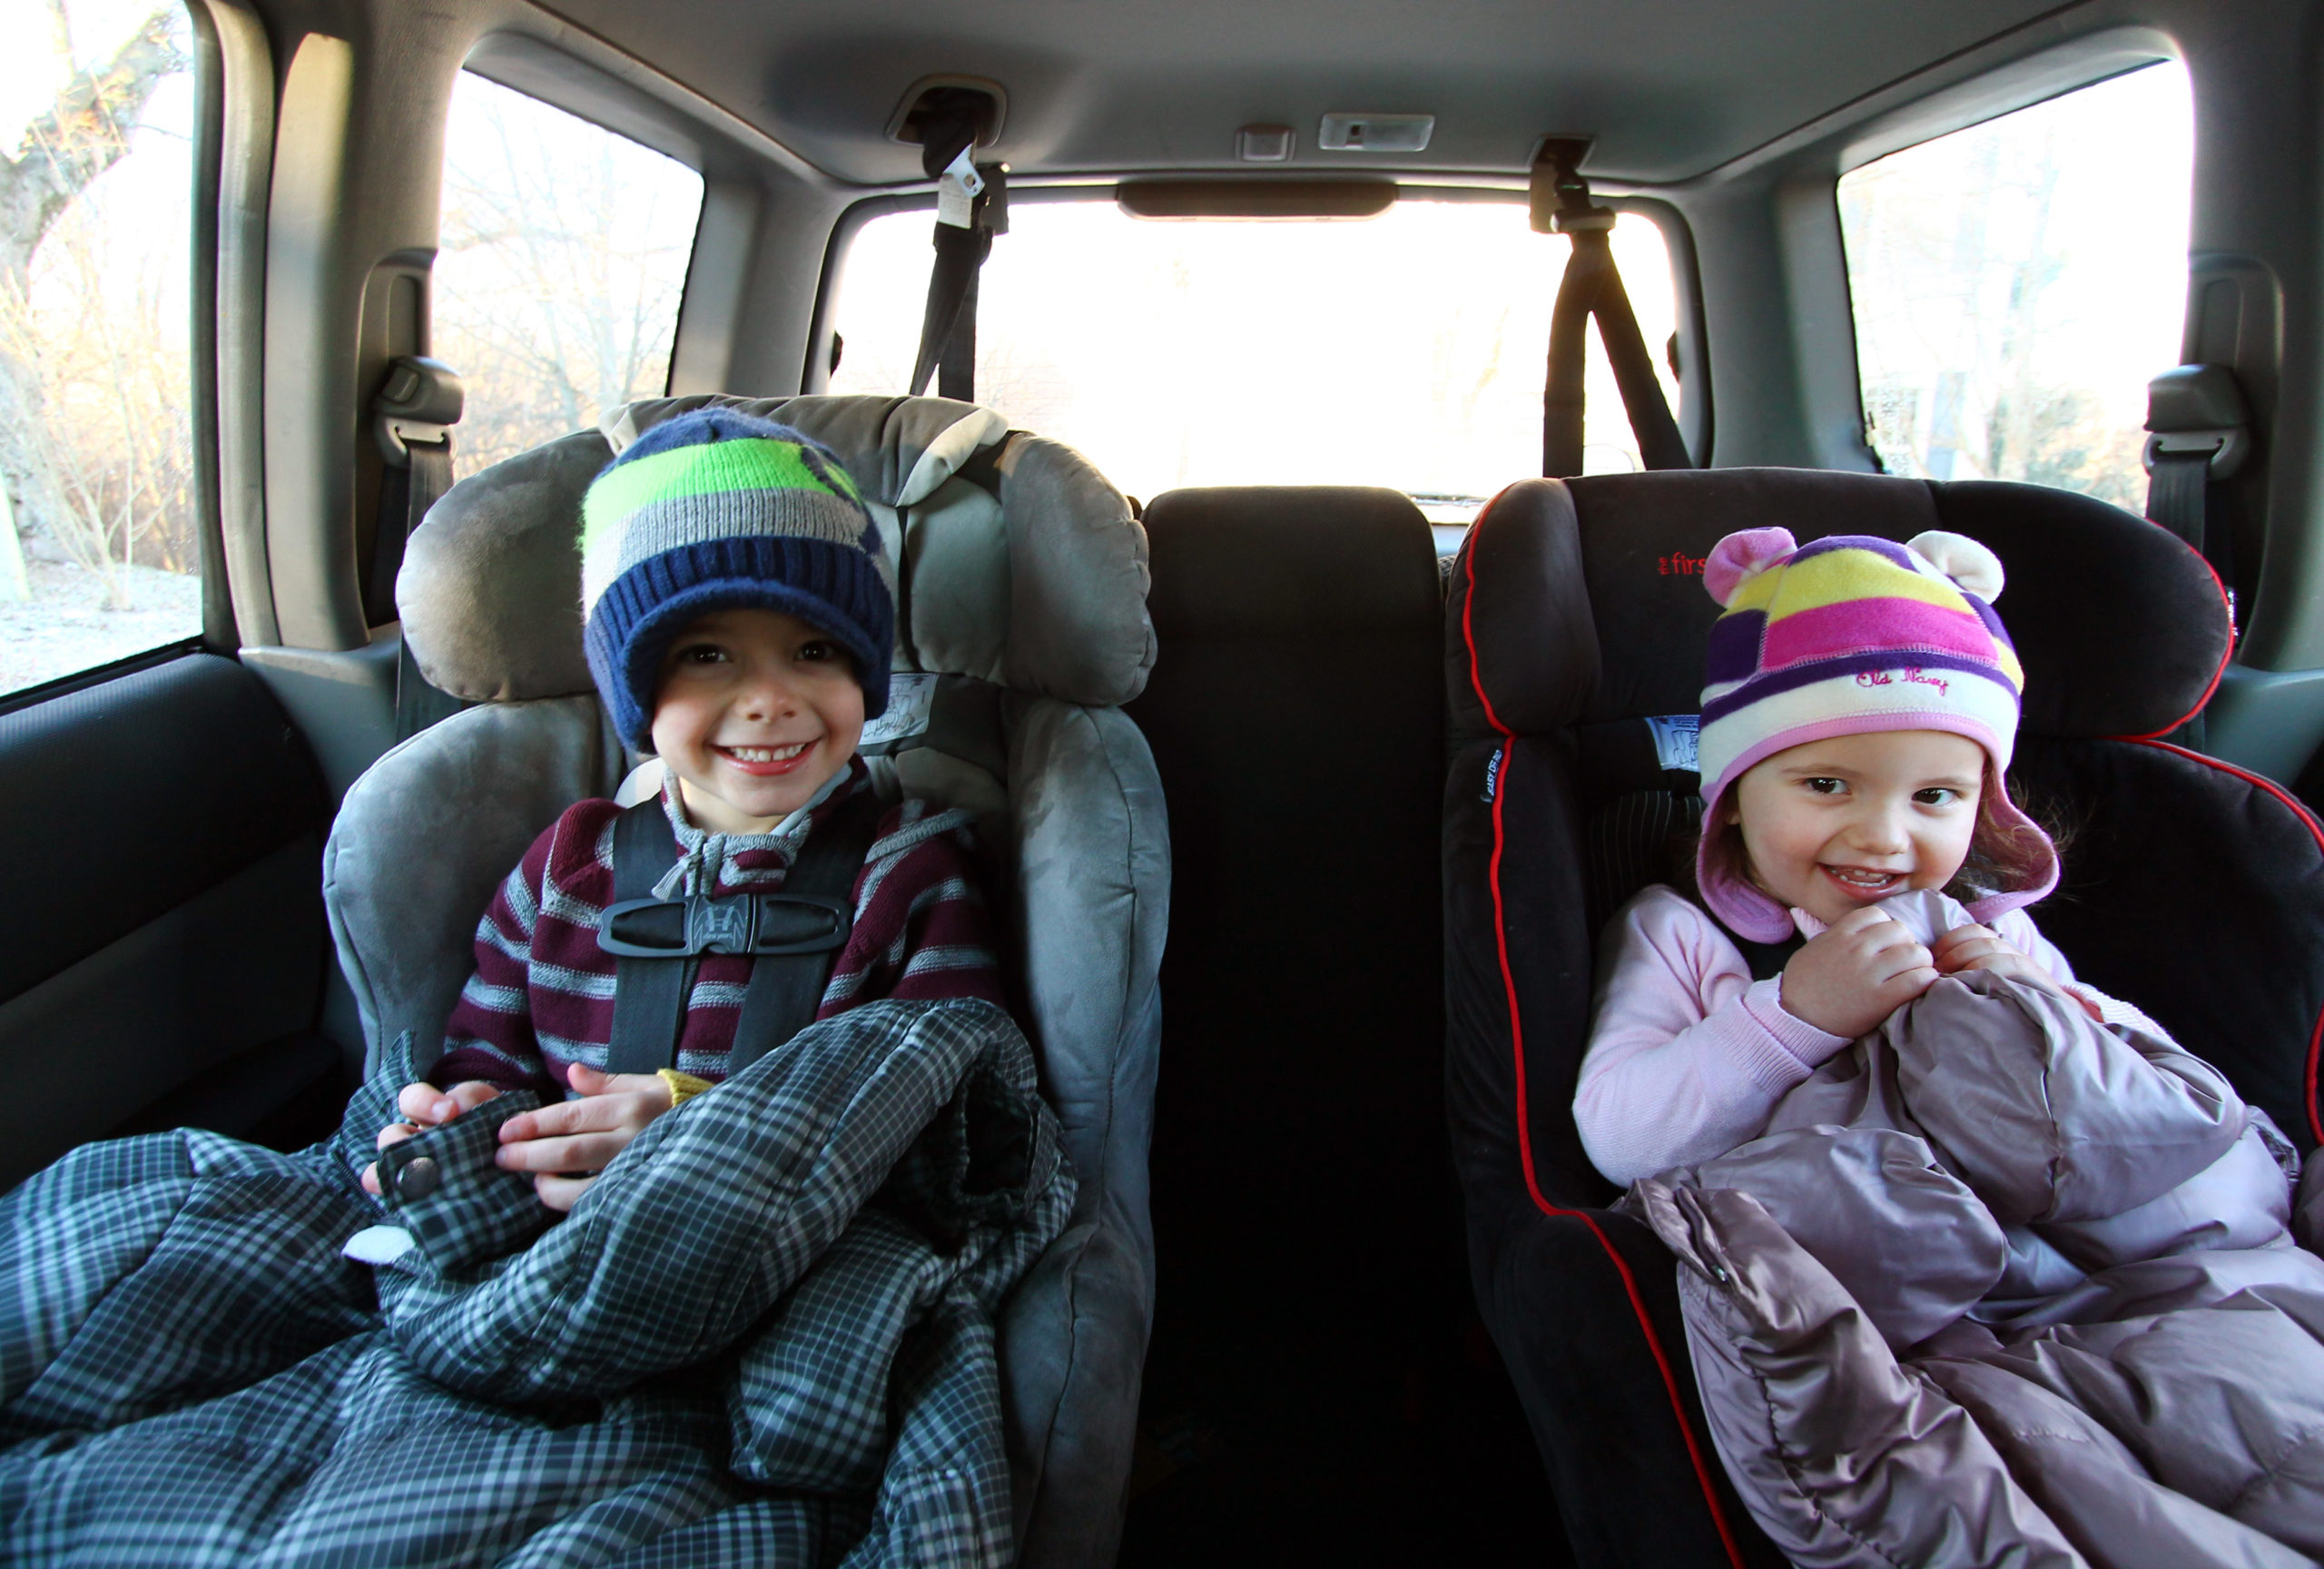 Bulky jackets and car seats create dangers